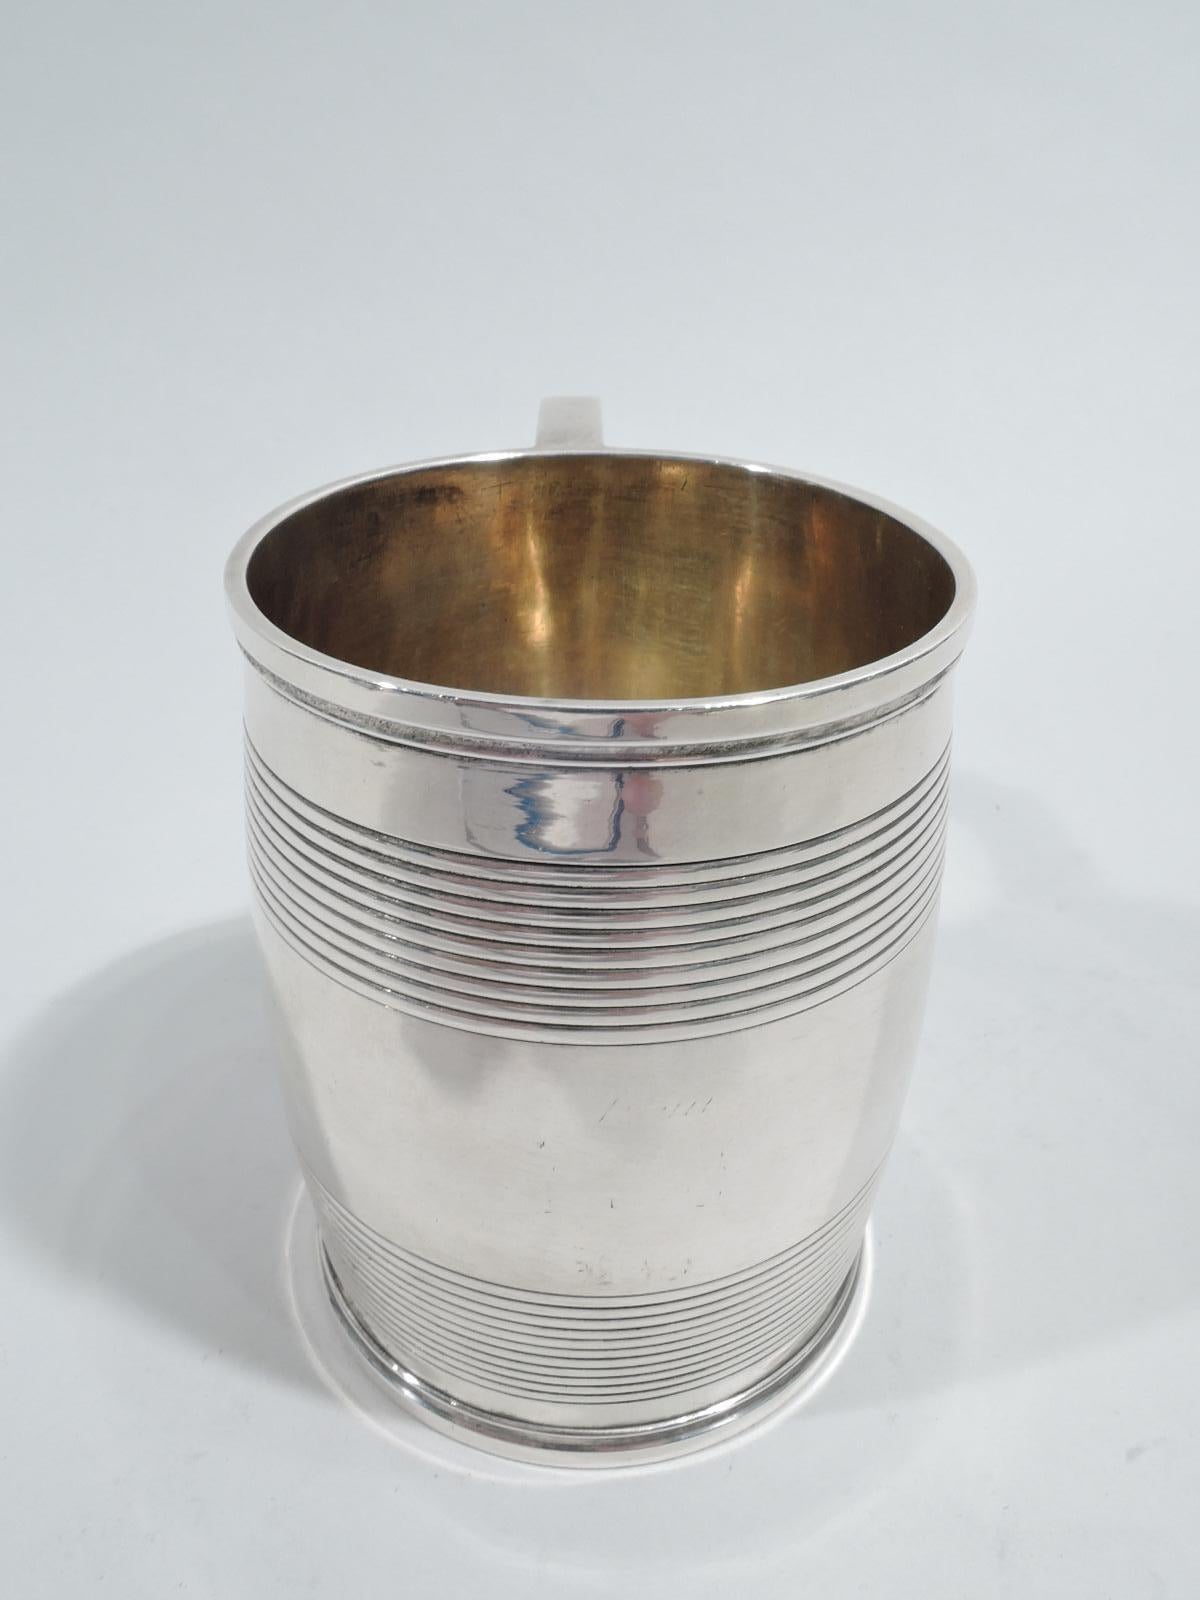 English Georgian sterling silver baby cup, 1822. Barrel body with reeded bands and scroll bracket handle. Interior gilt washed. A historic mug with room for engraving. Fully marked including London assay stamp, George IV duty stamp, and worn maker’s